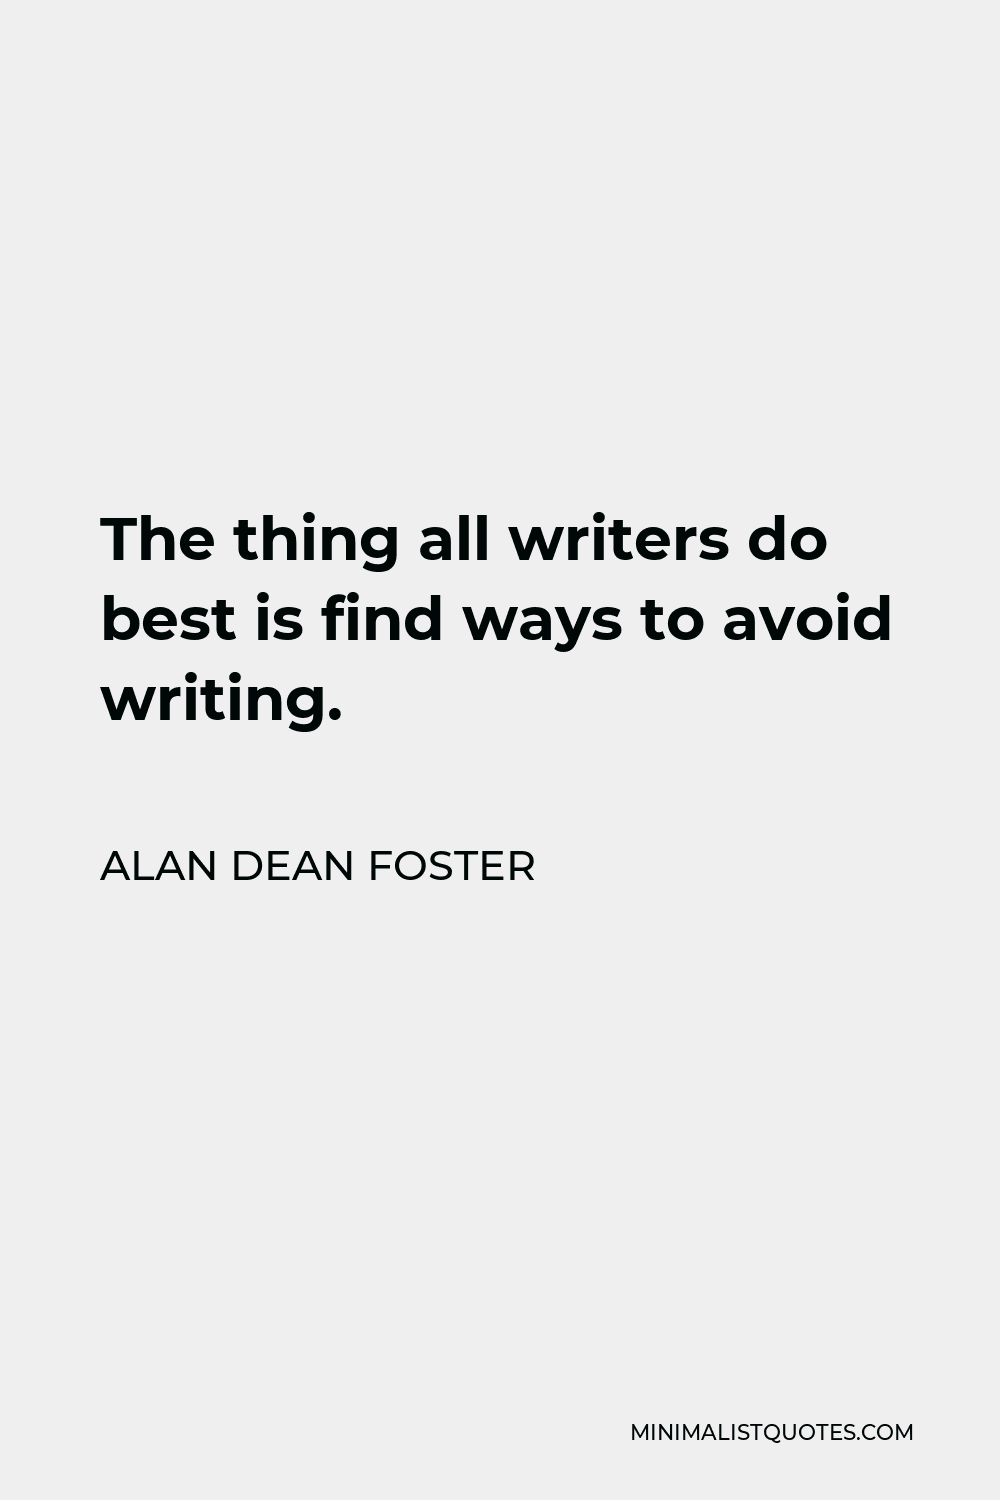 Alan Dean Foster Quote - The thing all writers do best is find ways to avoid writing.